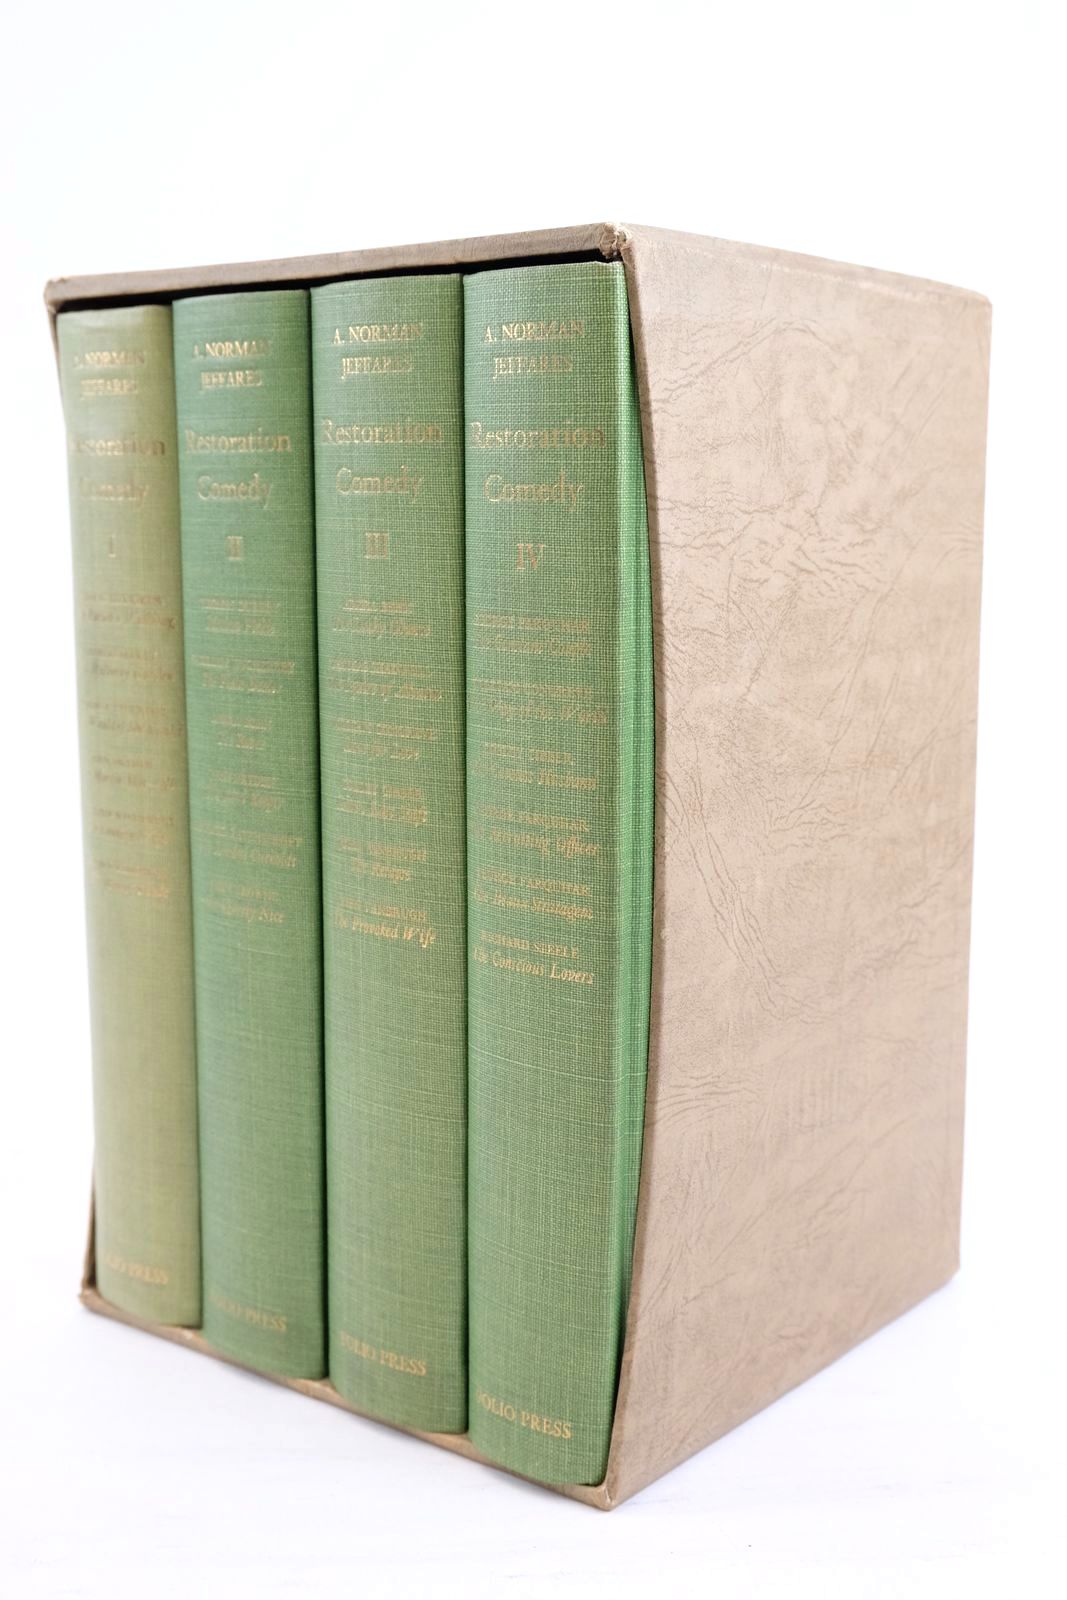 Photo of RESTORATION COMEDY (FOUR VOLUMES) written by Jeffares, A. Norman published by Folio Press (STOCK CODE: 1320954)  for sale by Stella & Rose's Books